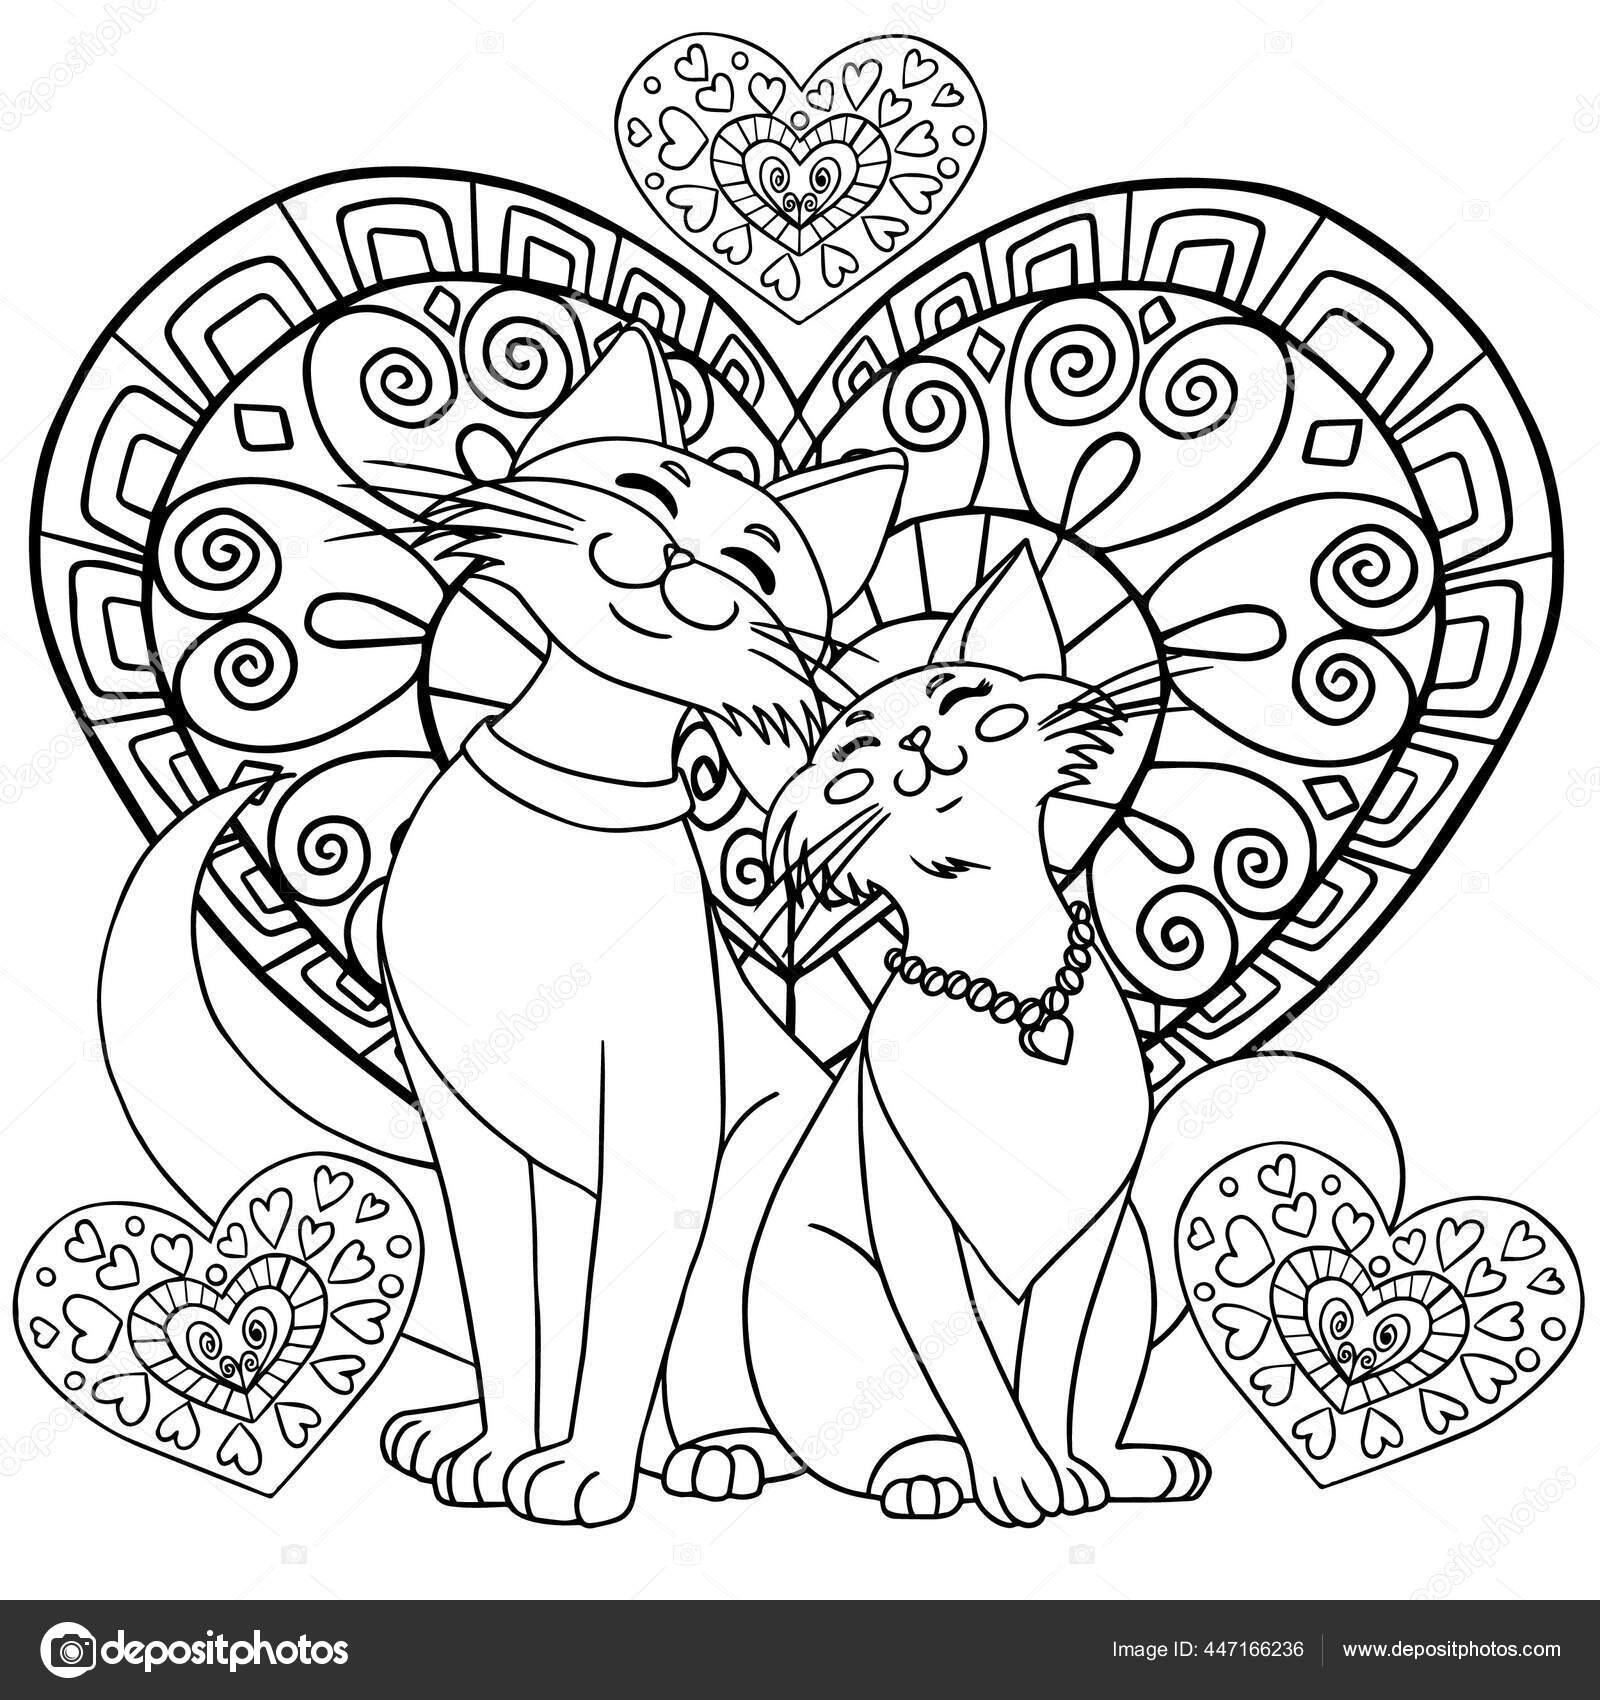 Lovely cats hearts couple animals valentine day coloring book page stock vector by daniellabelaya